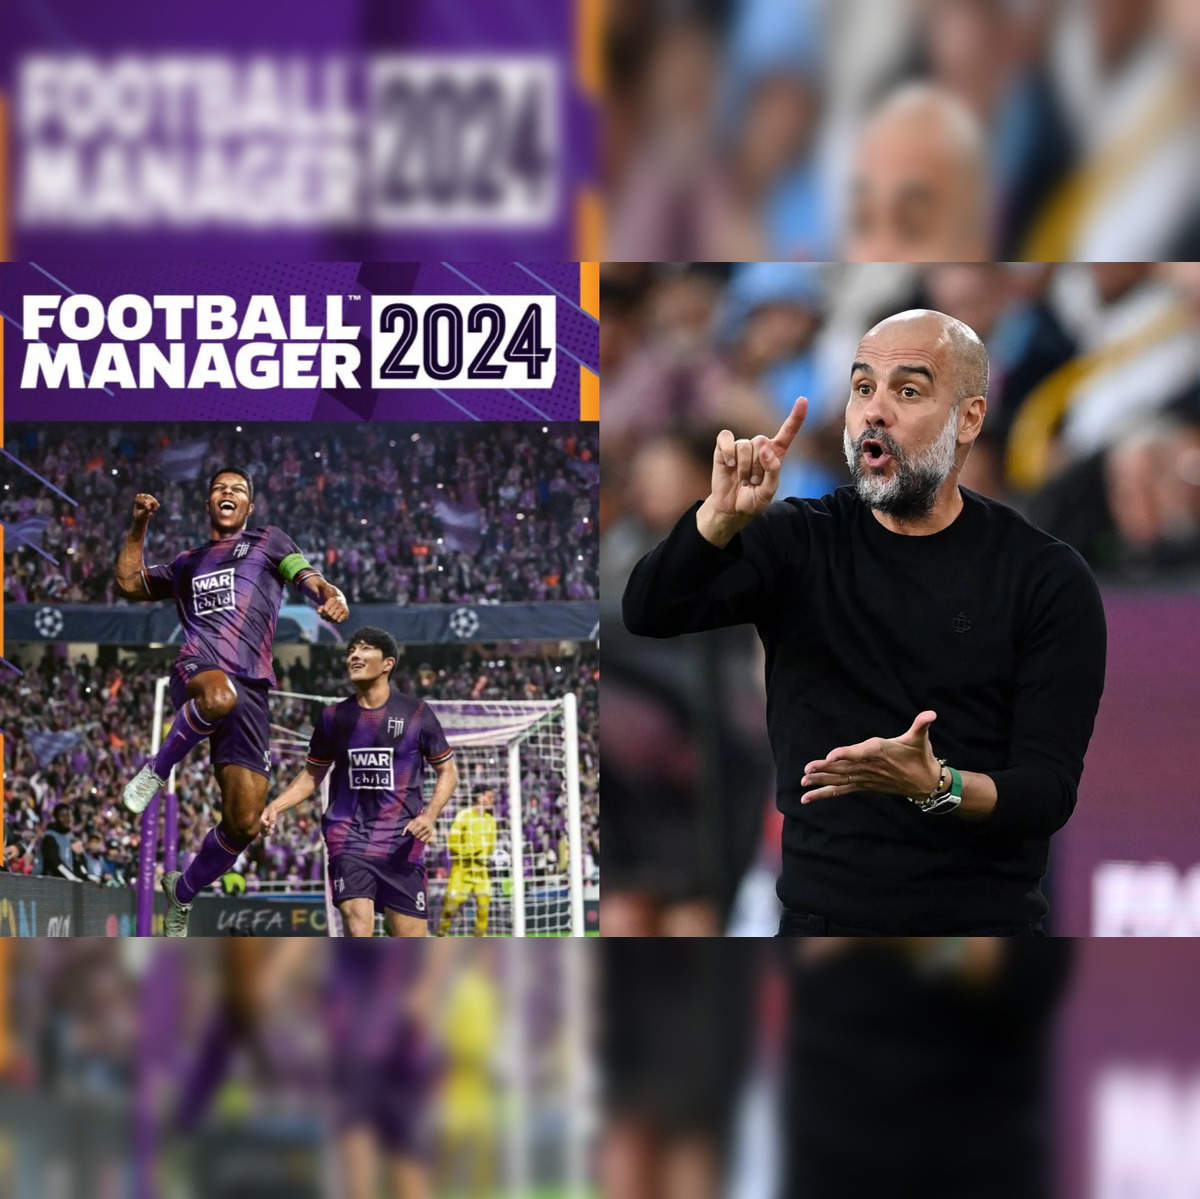 Football Manager 2023 Touch coming to Apple Arcade on November 8